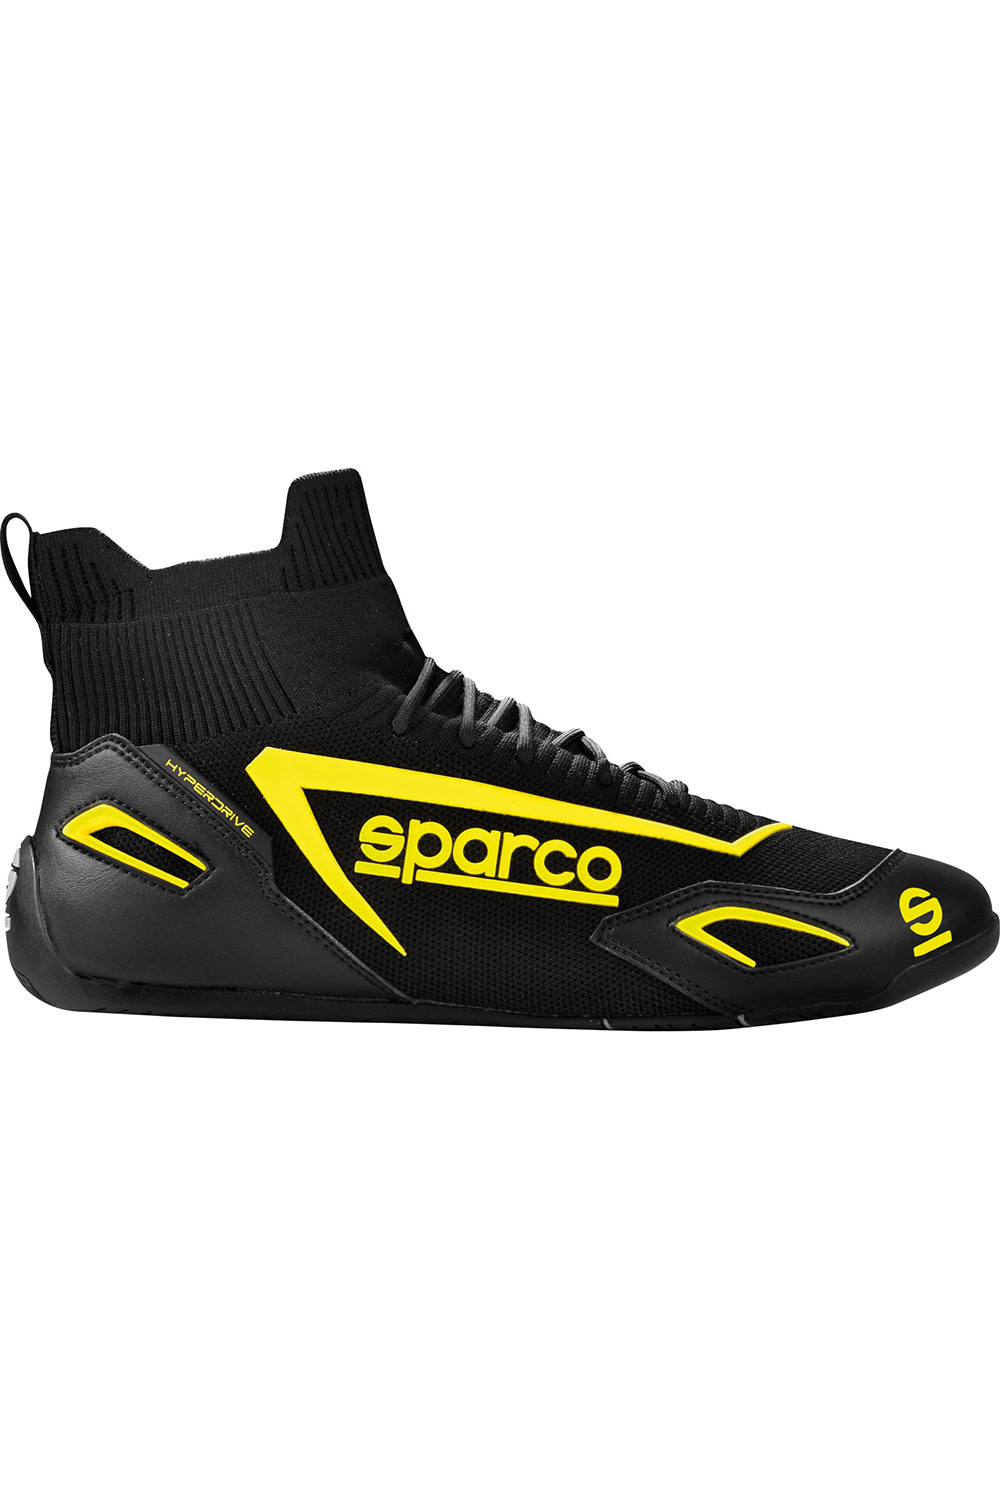 Sparco, SimRacing, Hyperdrive Shoes